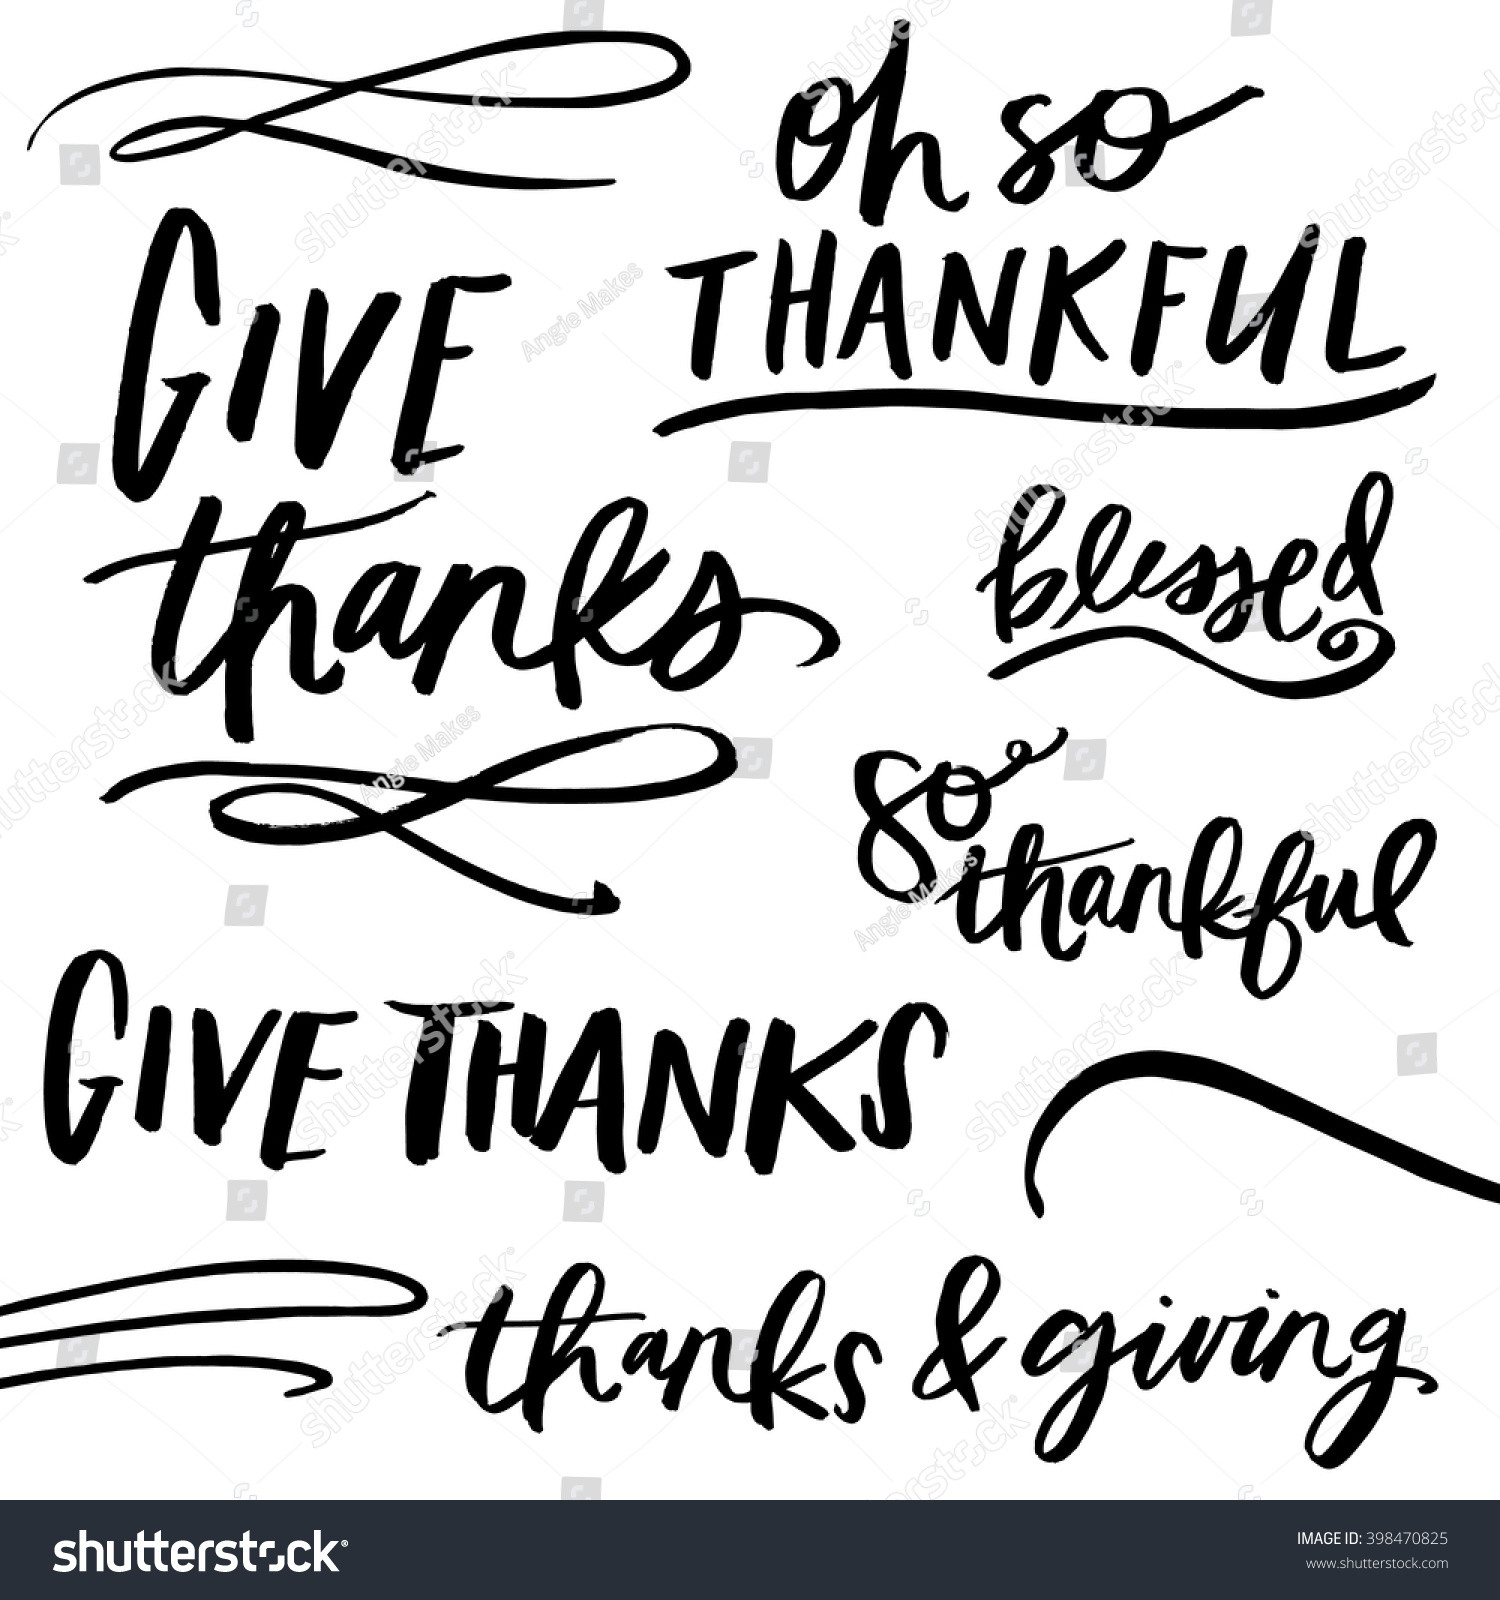 Thanksgiving Quotes Calligraphy
 Give Thanks Quotes Thanksgiving Quotes Modern Stock Vector